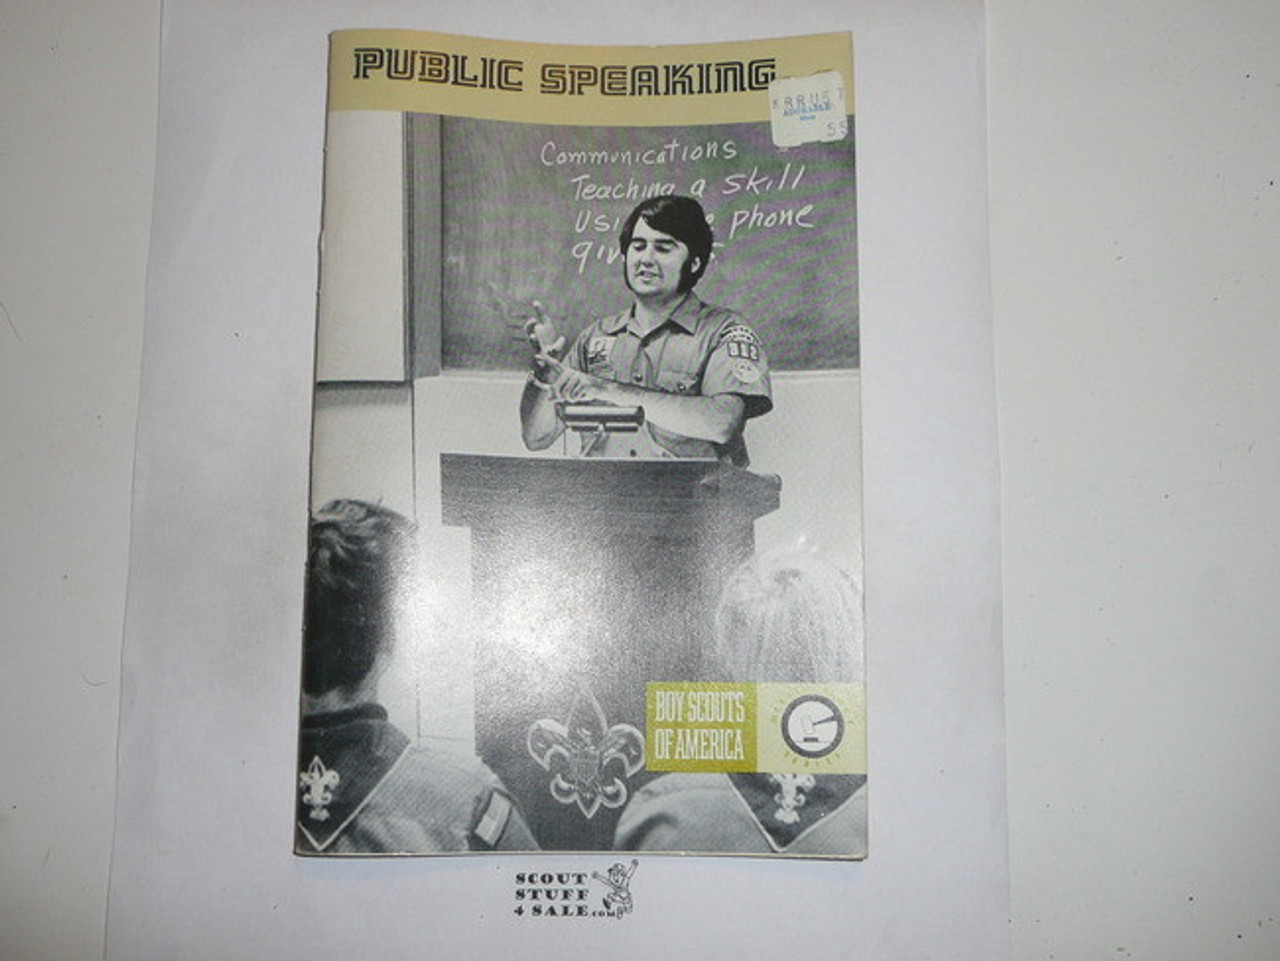 Public Speaking Merit Badge Pamphlet, Type 8, Green Band Cover, 7-77 printing